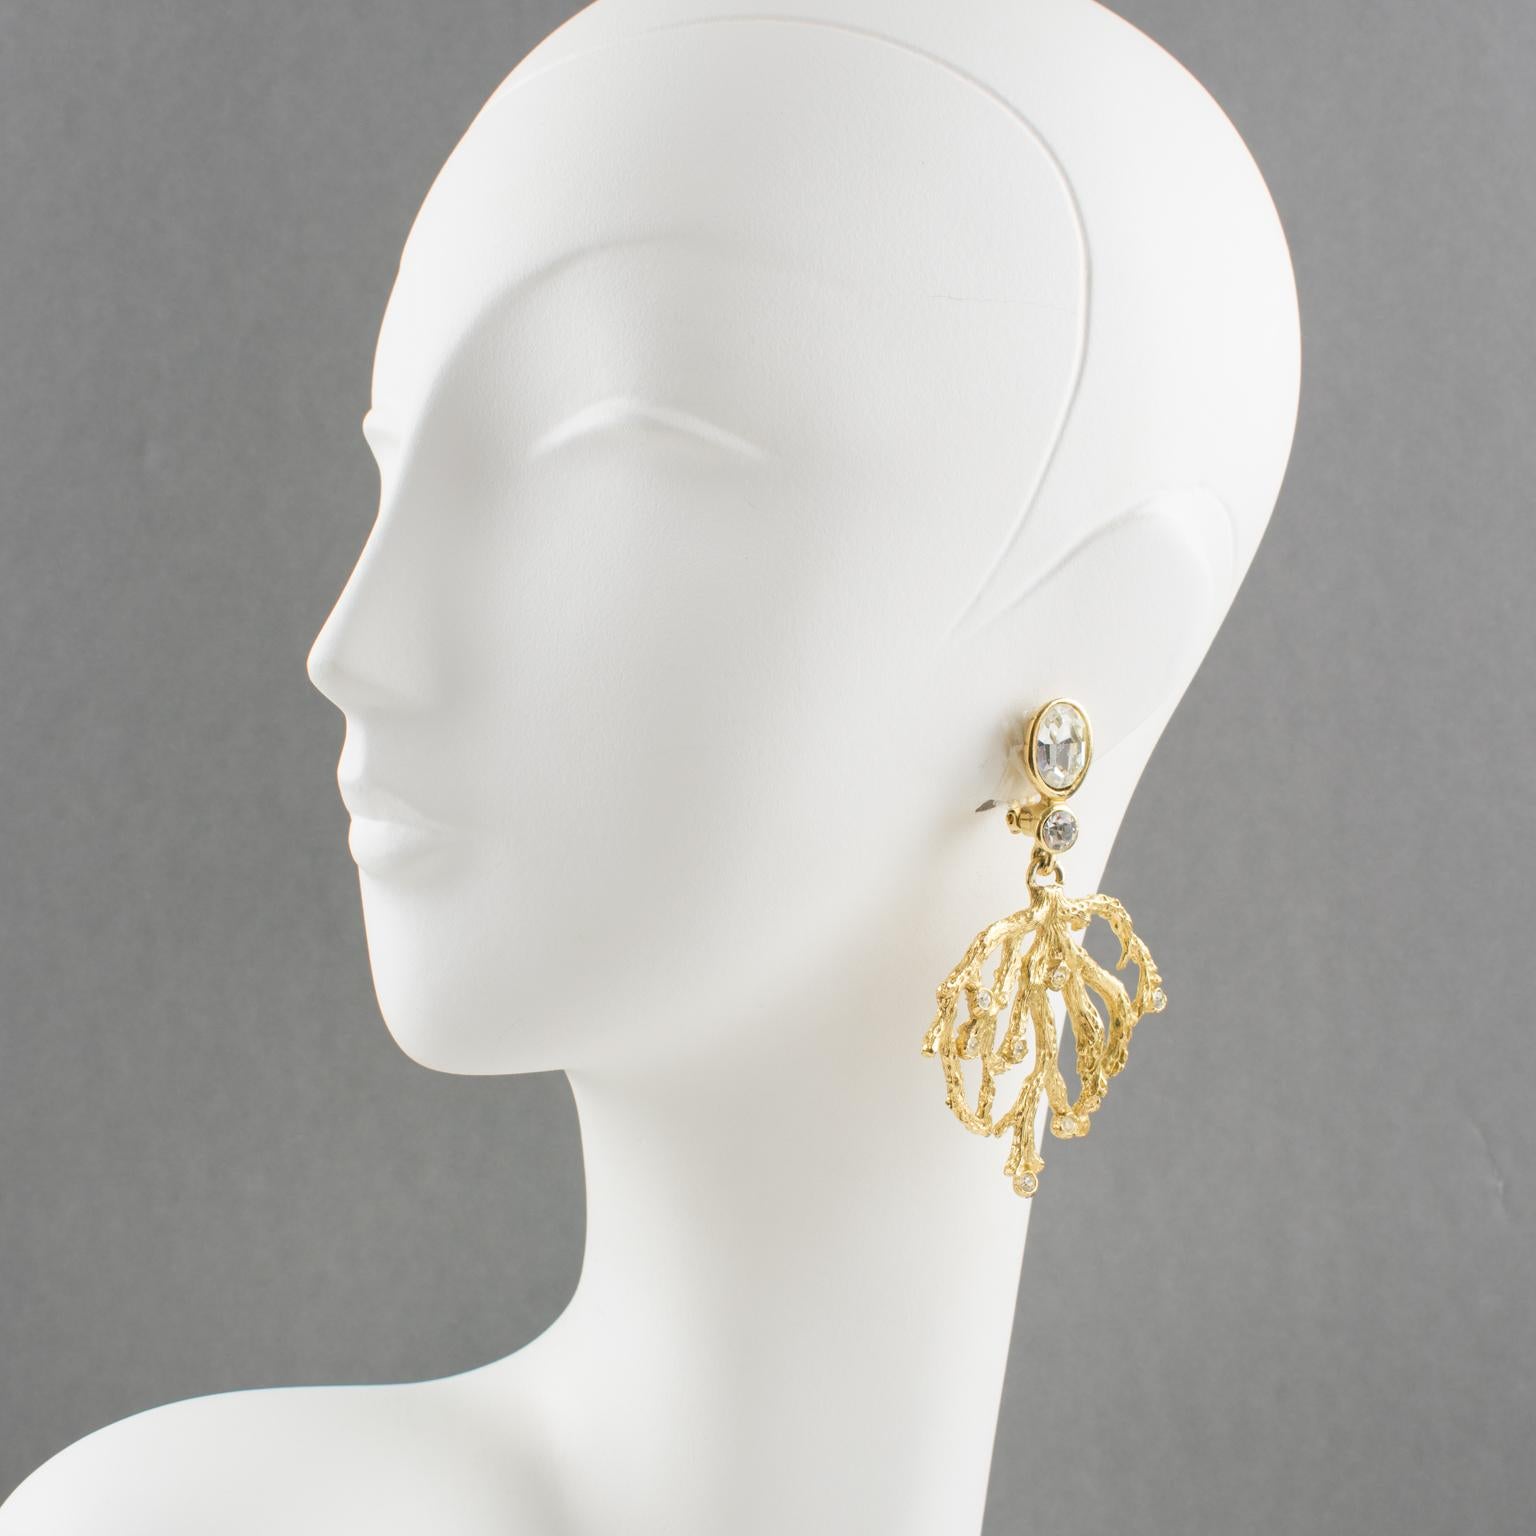 Fabulous Yves Saint Laurent Paris signed clip-on earrings. Gilt metal dangling shape with hand-made feel textured pattern, carved and see-thru branch design complements with clear crystal rhinestones. YSL signature logo engraved on fastenings with